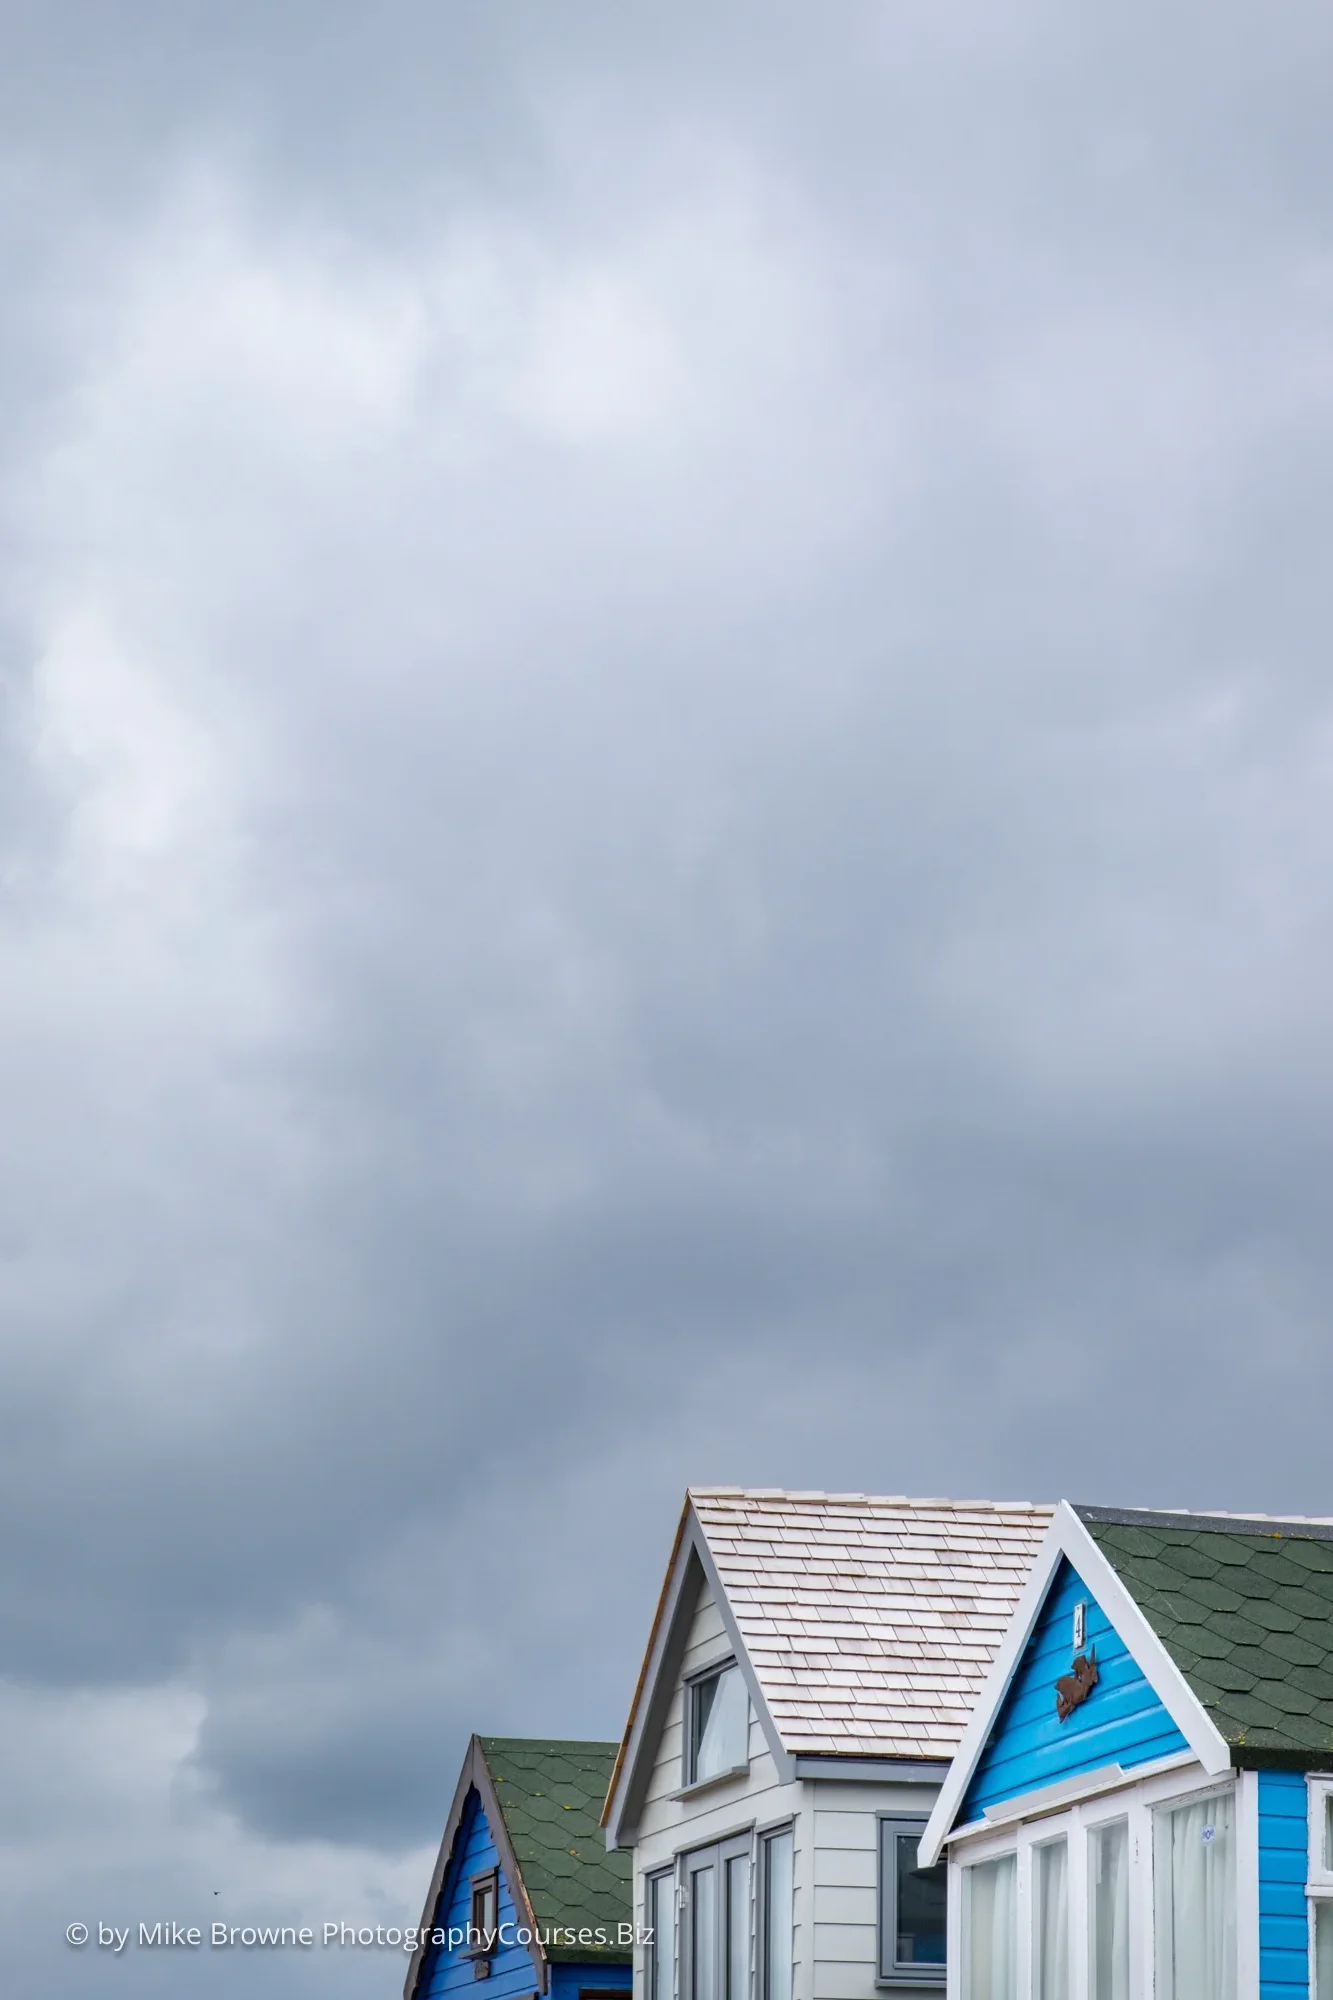 slanting roofs of three beach huts against cloudy sky